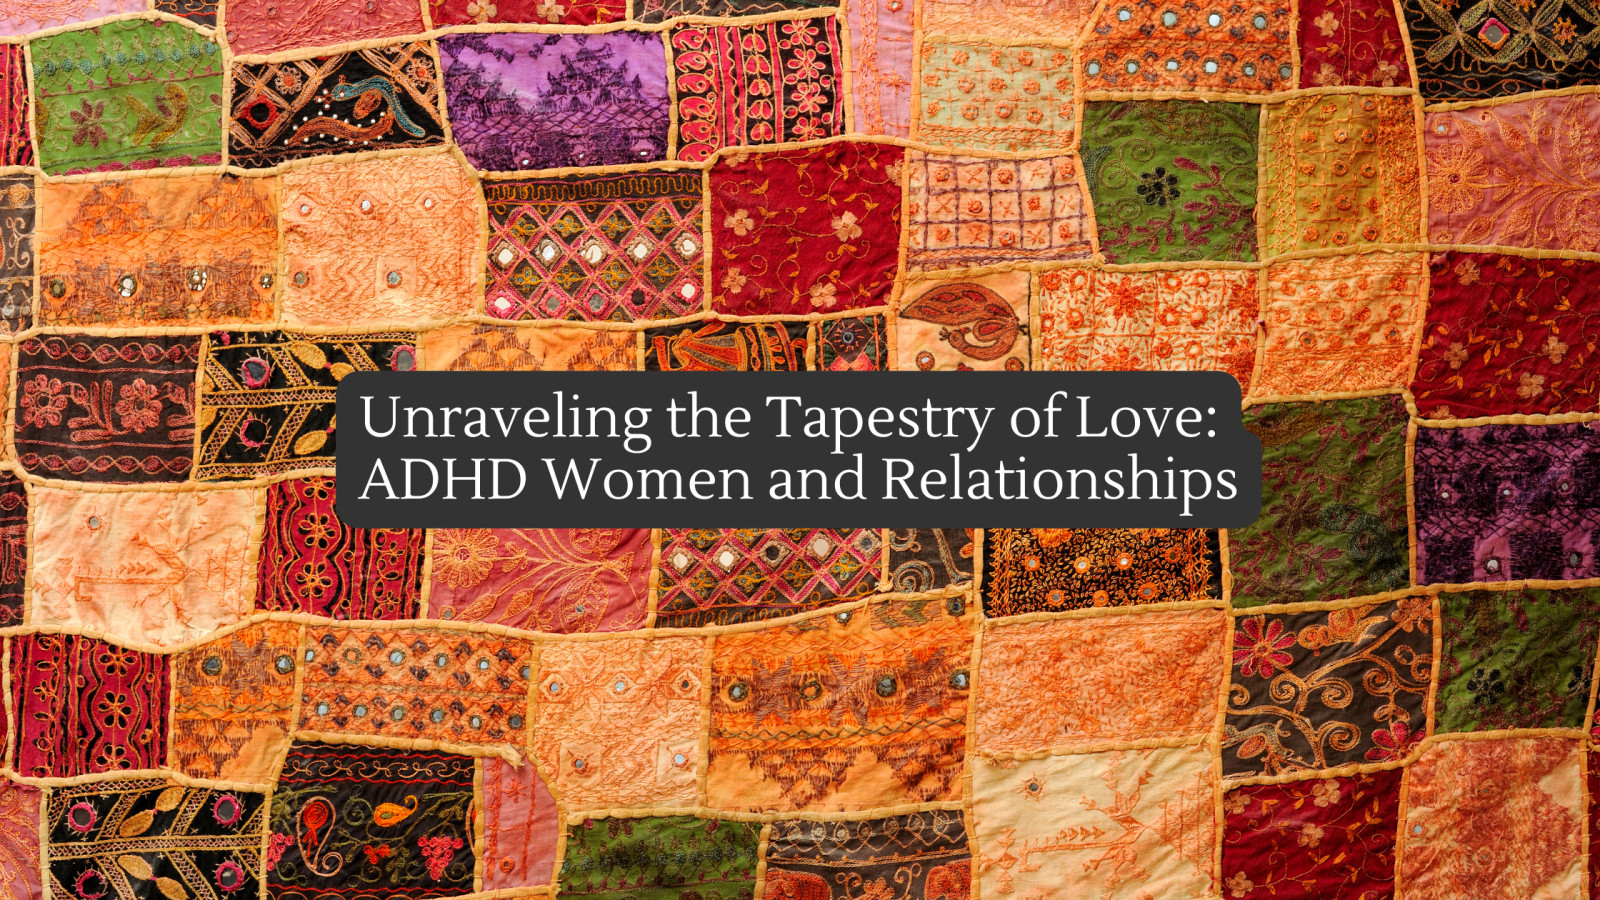 Unraveling the Tapestry of Love: ADHD Women and Relationships